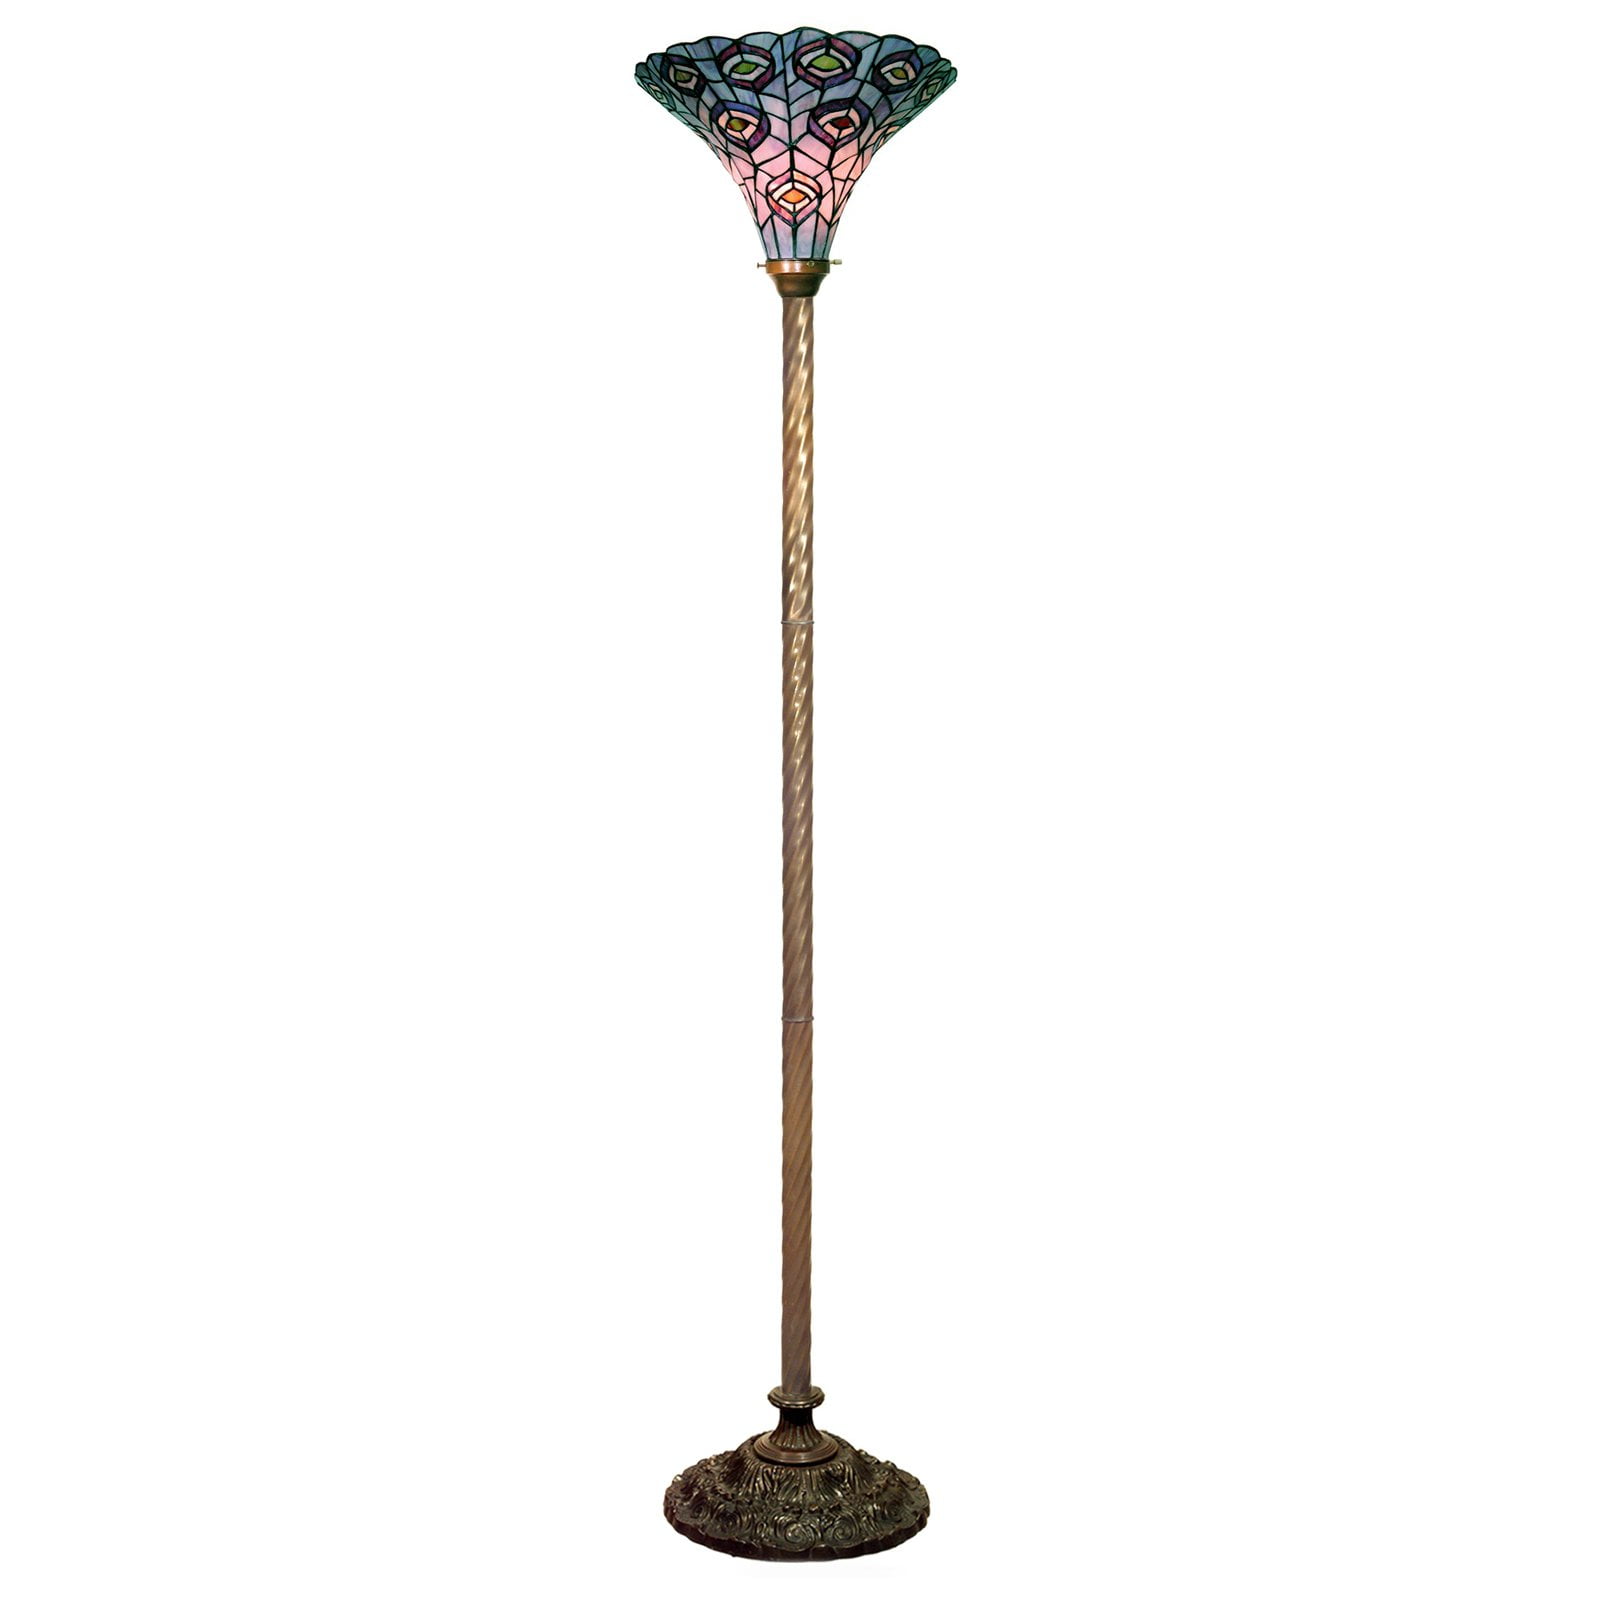 Tiffany-Style Peacock Torchiere Lamp